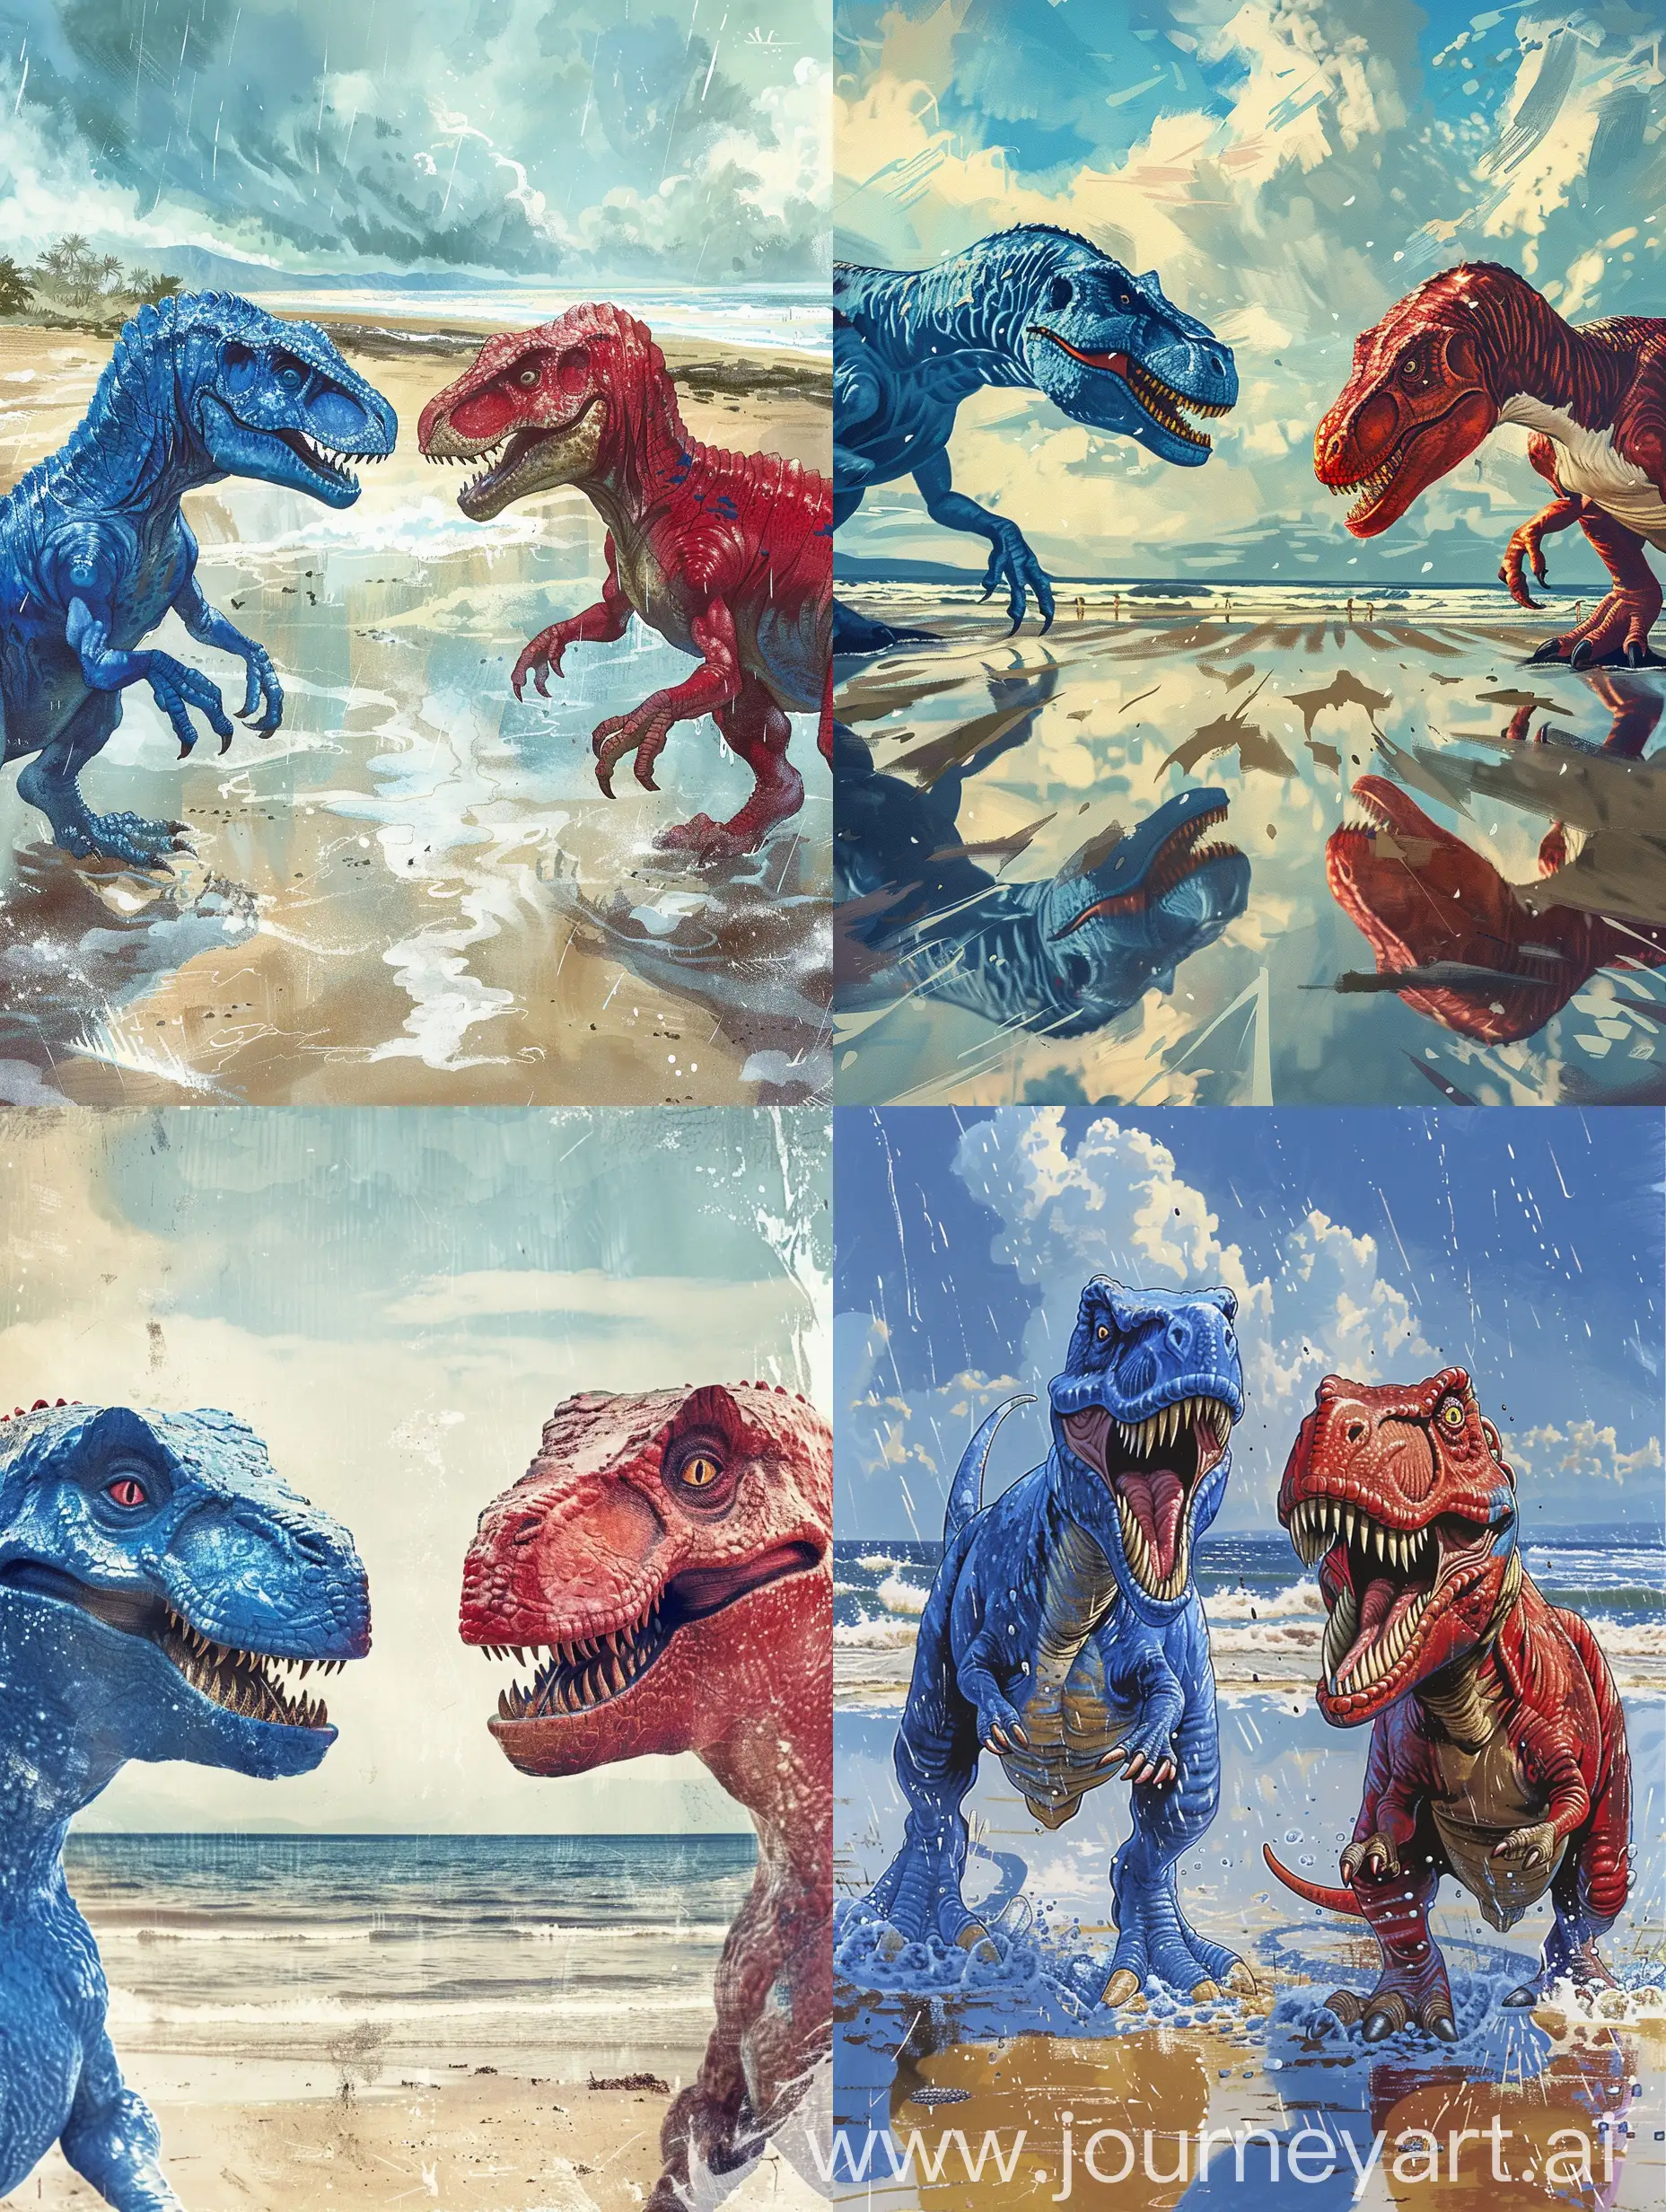 two t-rexes, one blue and one red, at the seaside